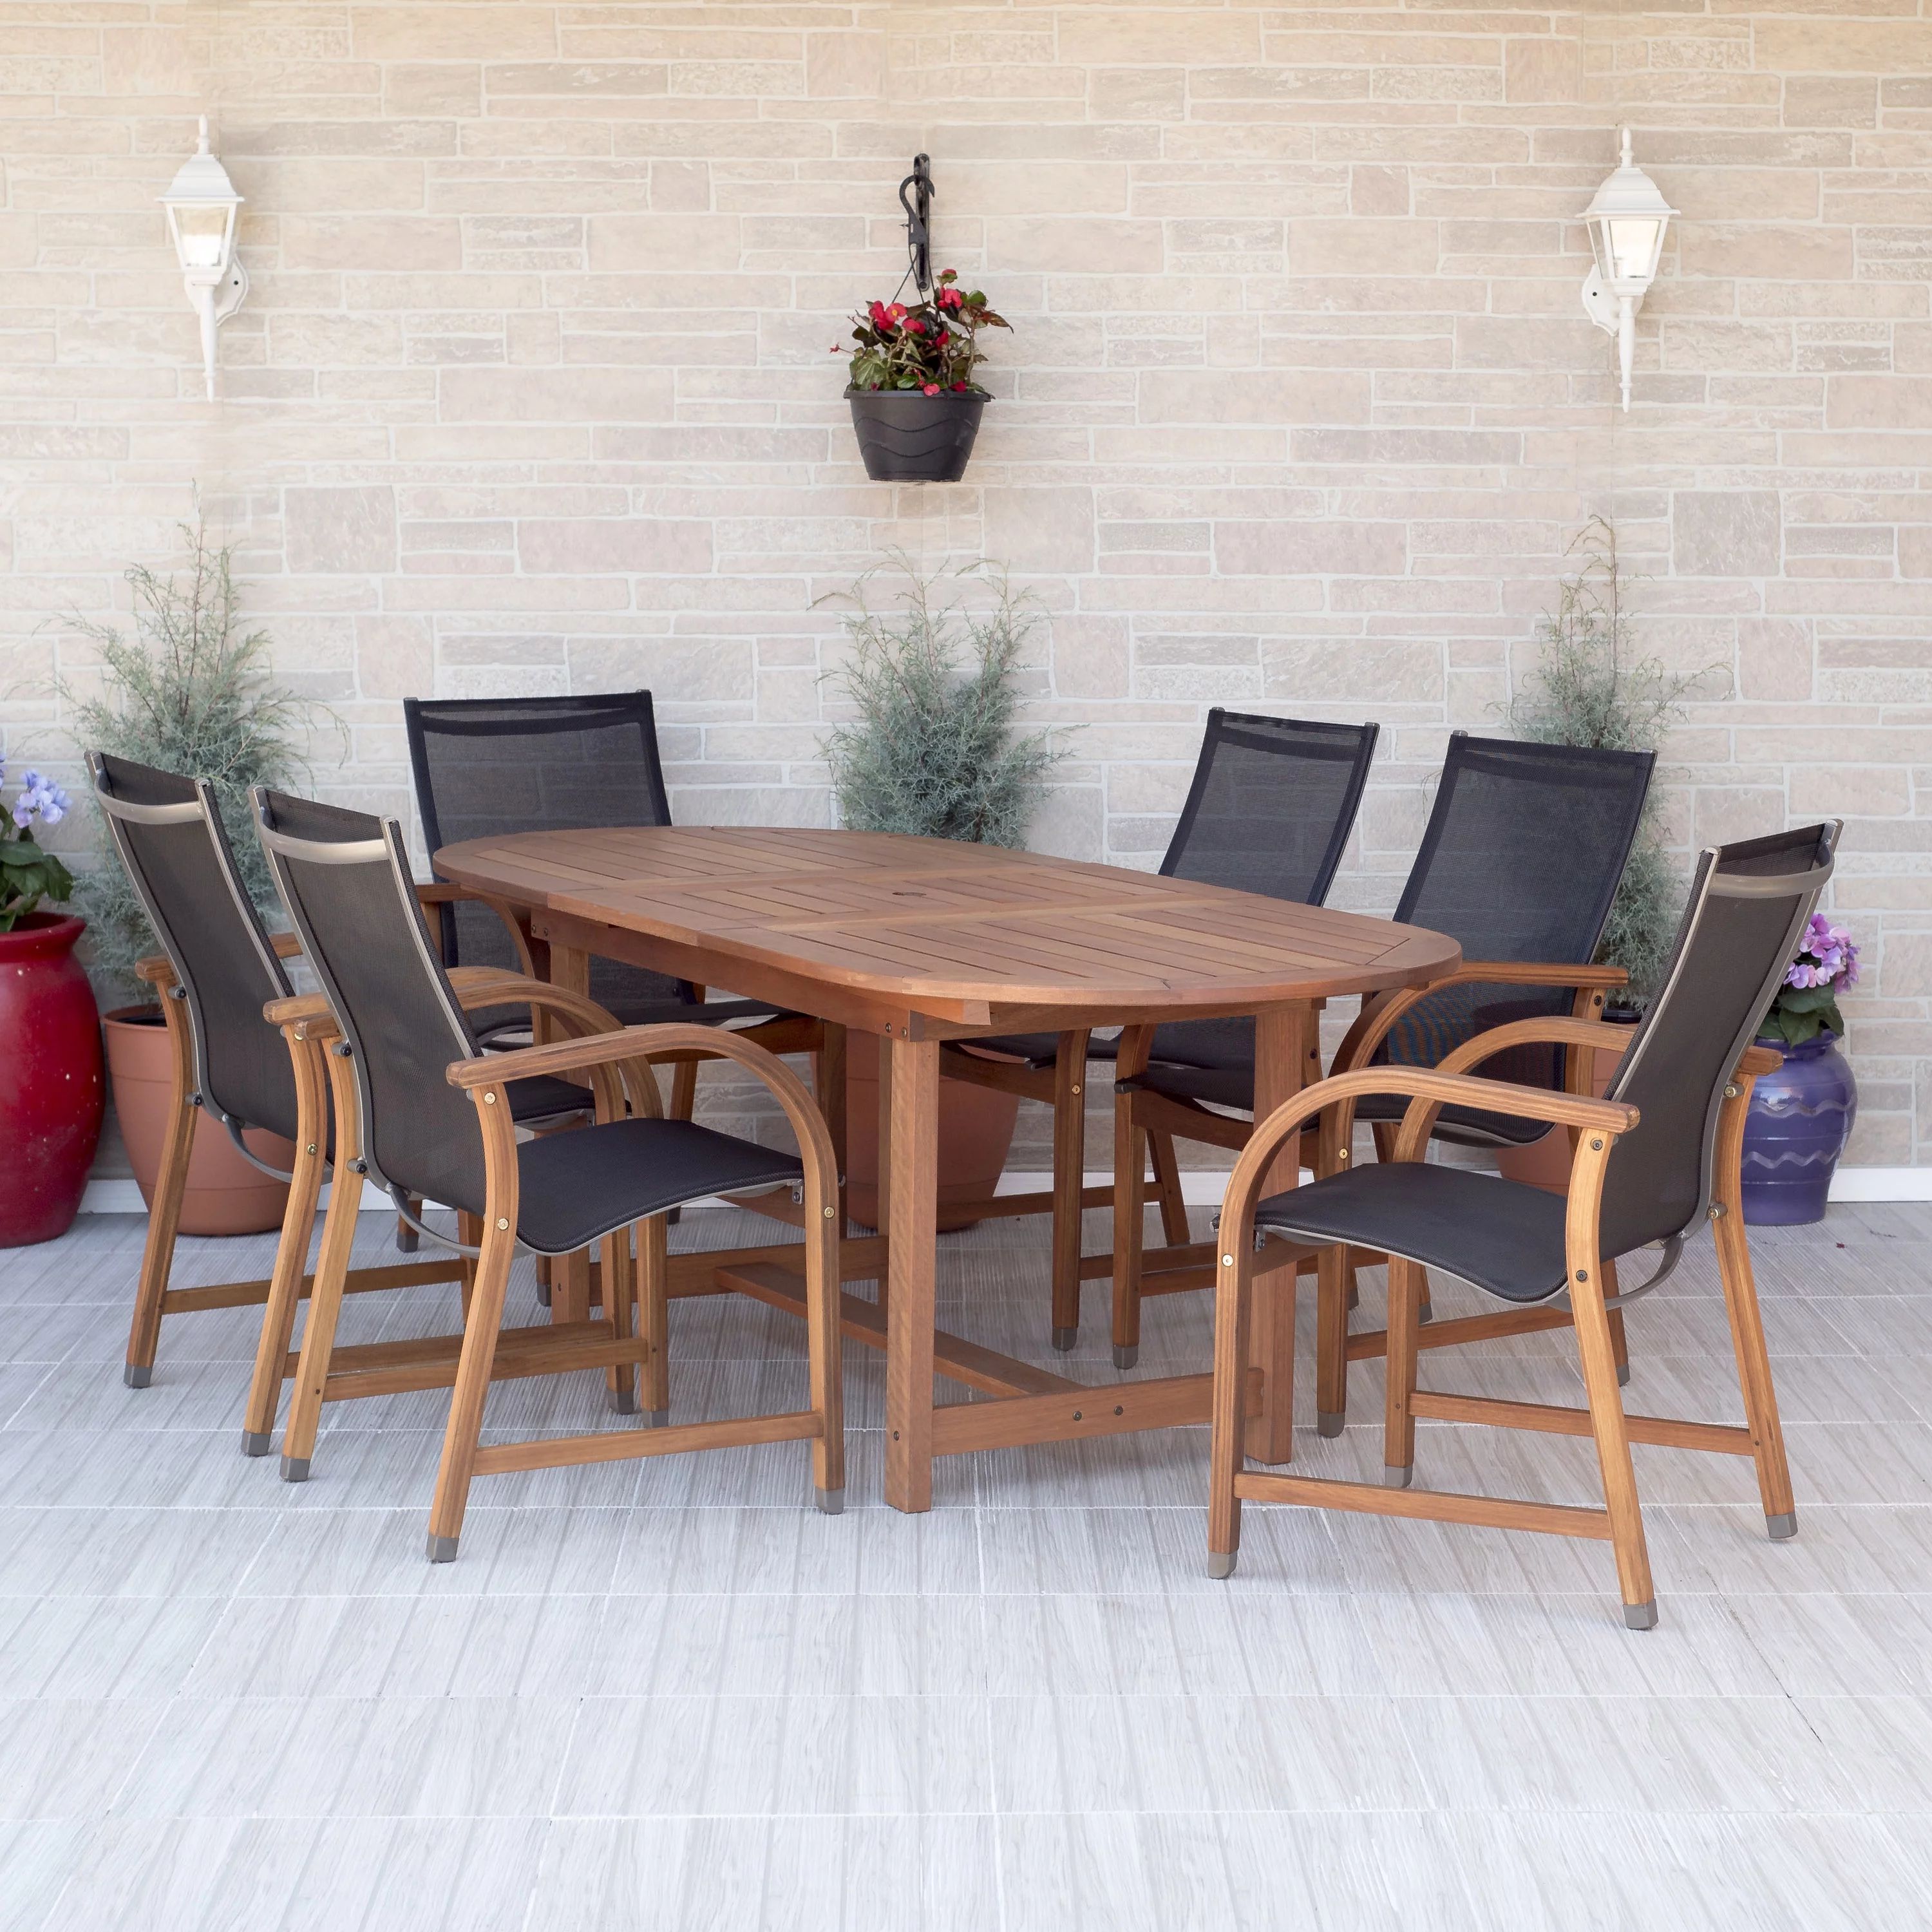 Bahamas 7-Piece Extendable Oval Patio Dining Set, Solid Wood 100% FSC Certified | Walmart (US)